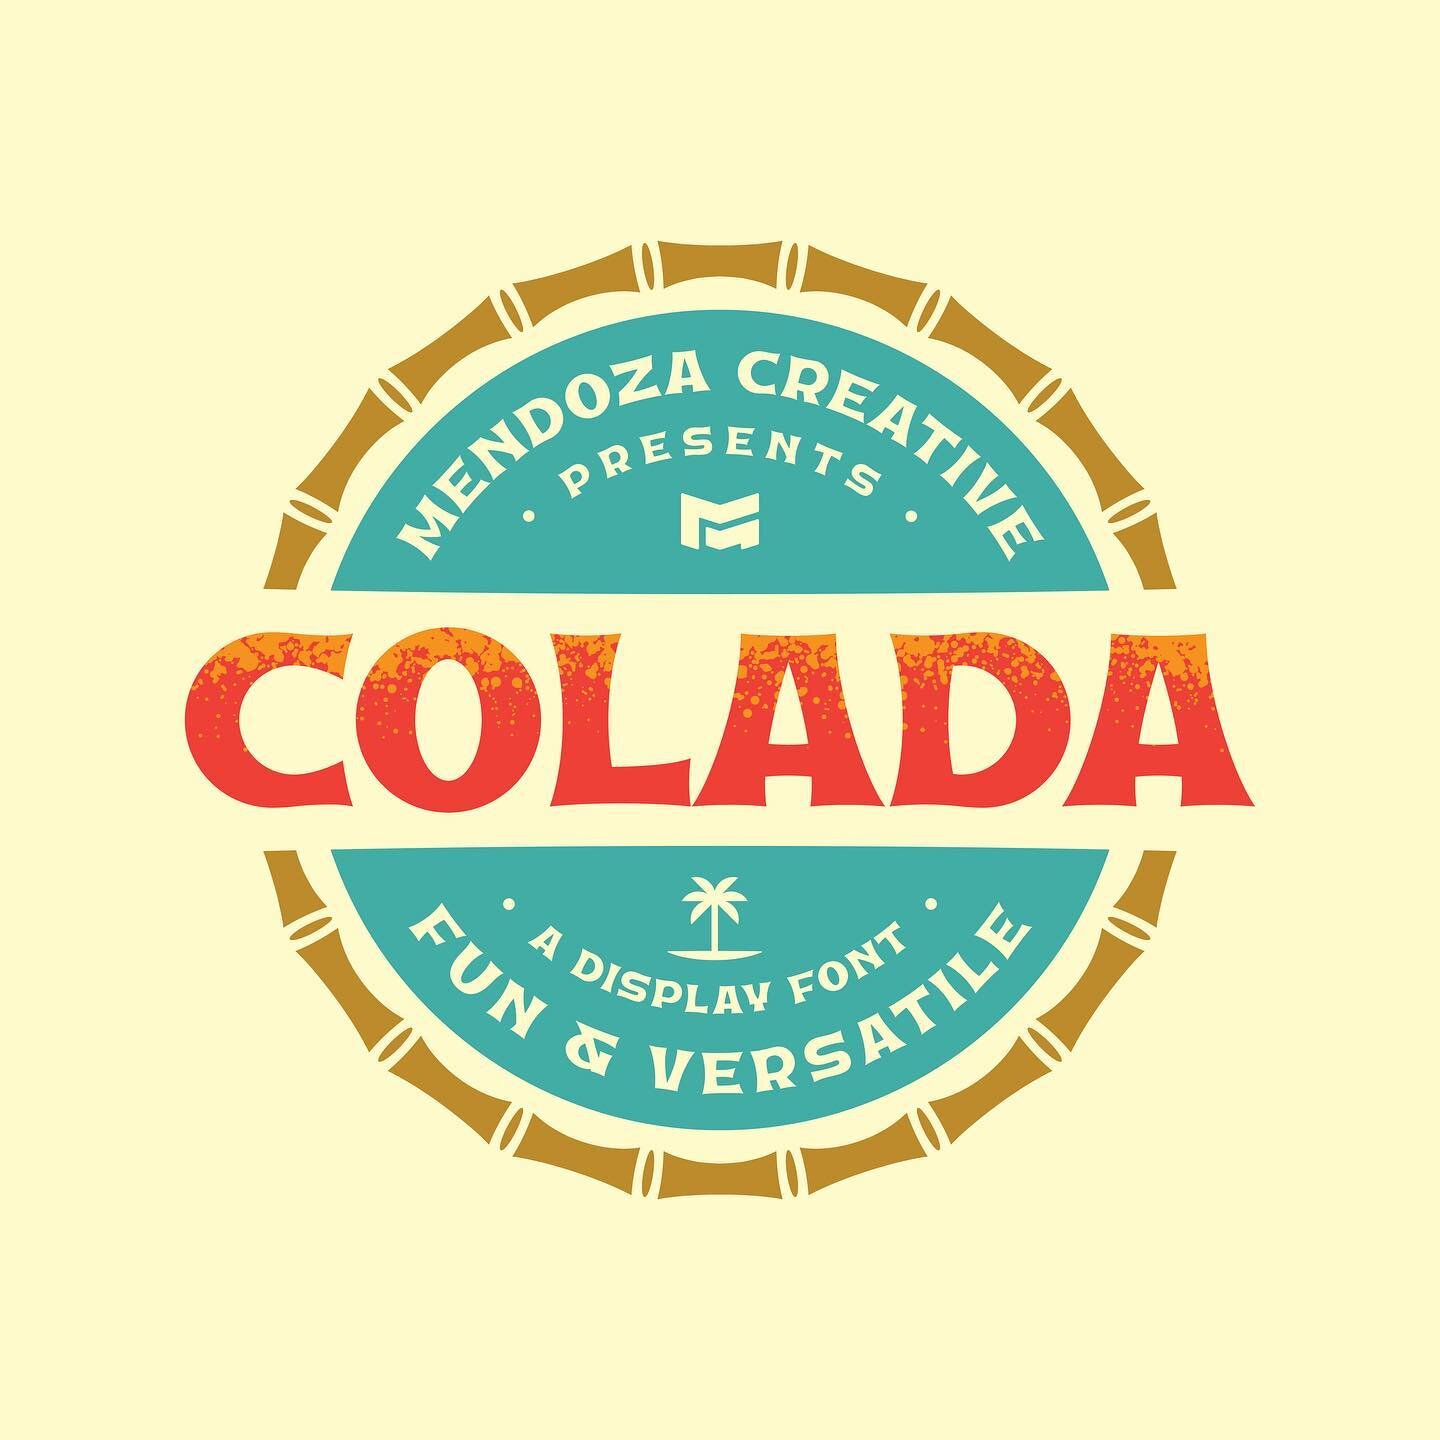 💥BOOM💥 A gift for you all!

Introducing the third font by Mendoza Creative, Colada!

Inspired by simpler times and tropical outings, Colada brings a bit of paradise to your typographic arsenal! It&rsquo;s versatile, it&rsquo;s bold, it&rsquo;s real